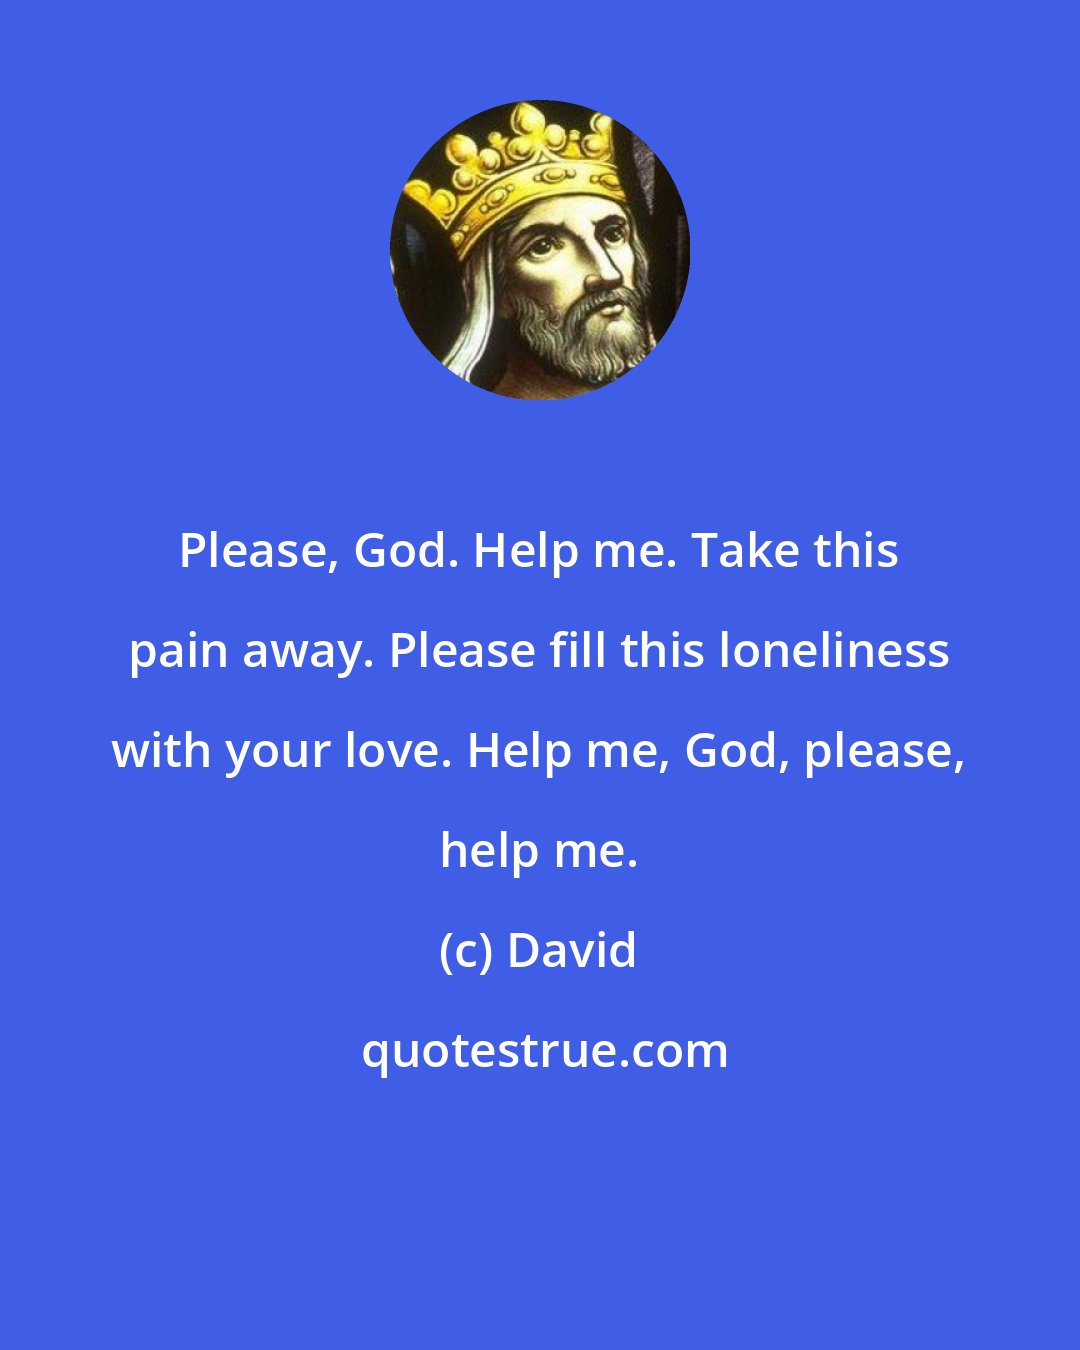 David: Please, God. Help me. Take this pain away. Please fill this loneliness with your love. Help me, God, please, help me.